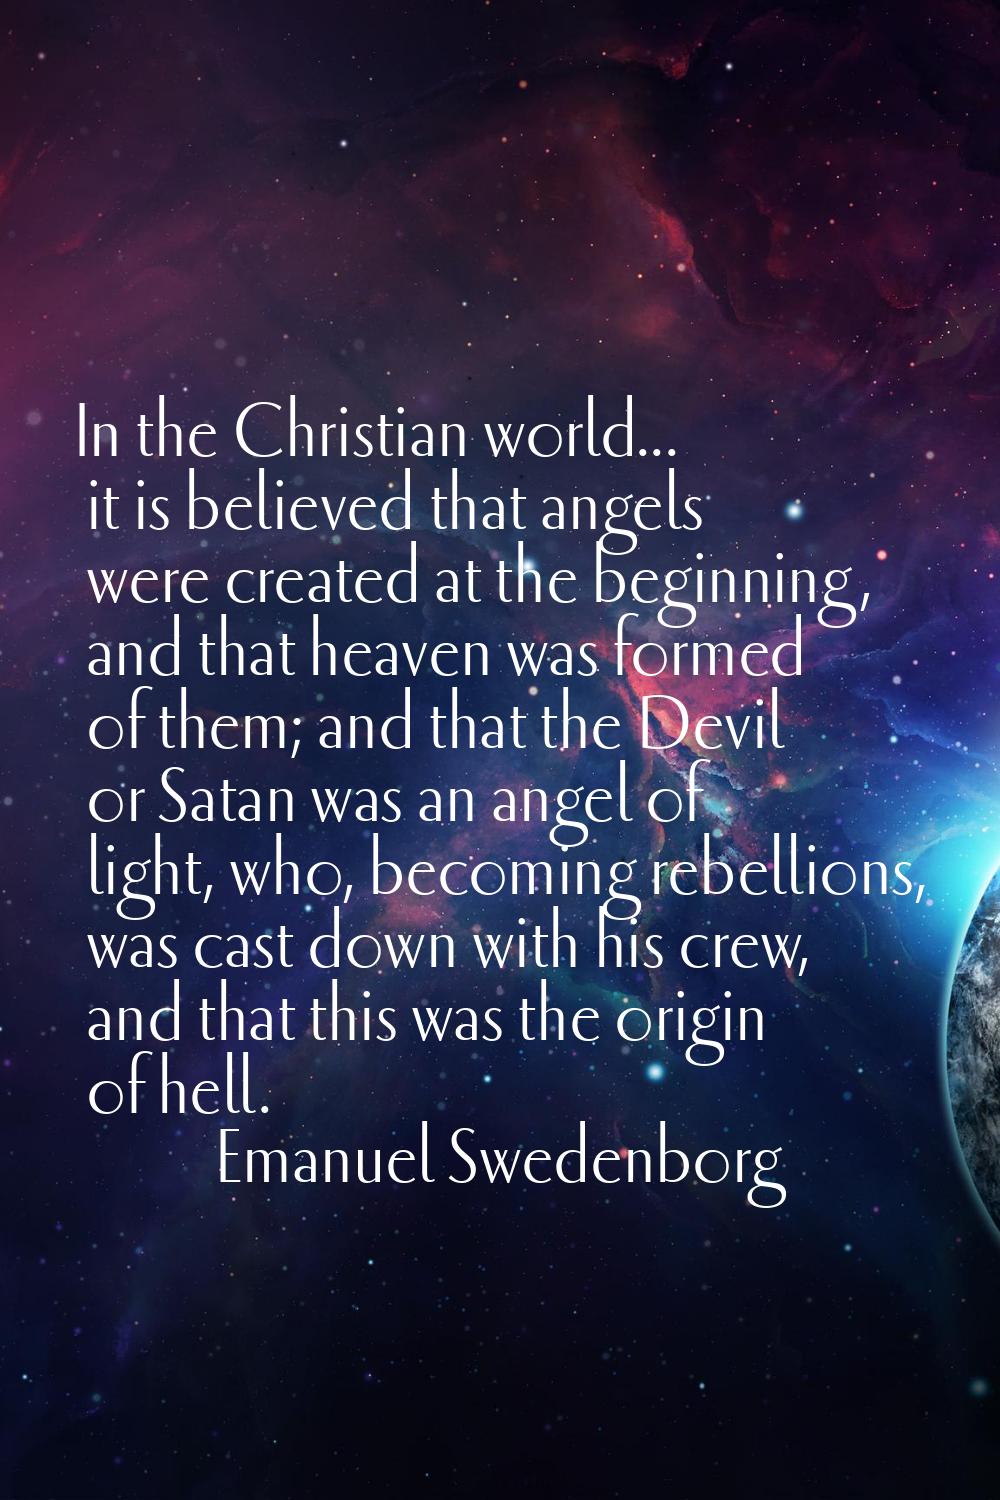 In the Christian world... it is believed that angels were created at the beginning, and that heaven